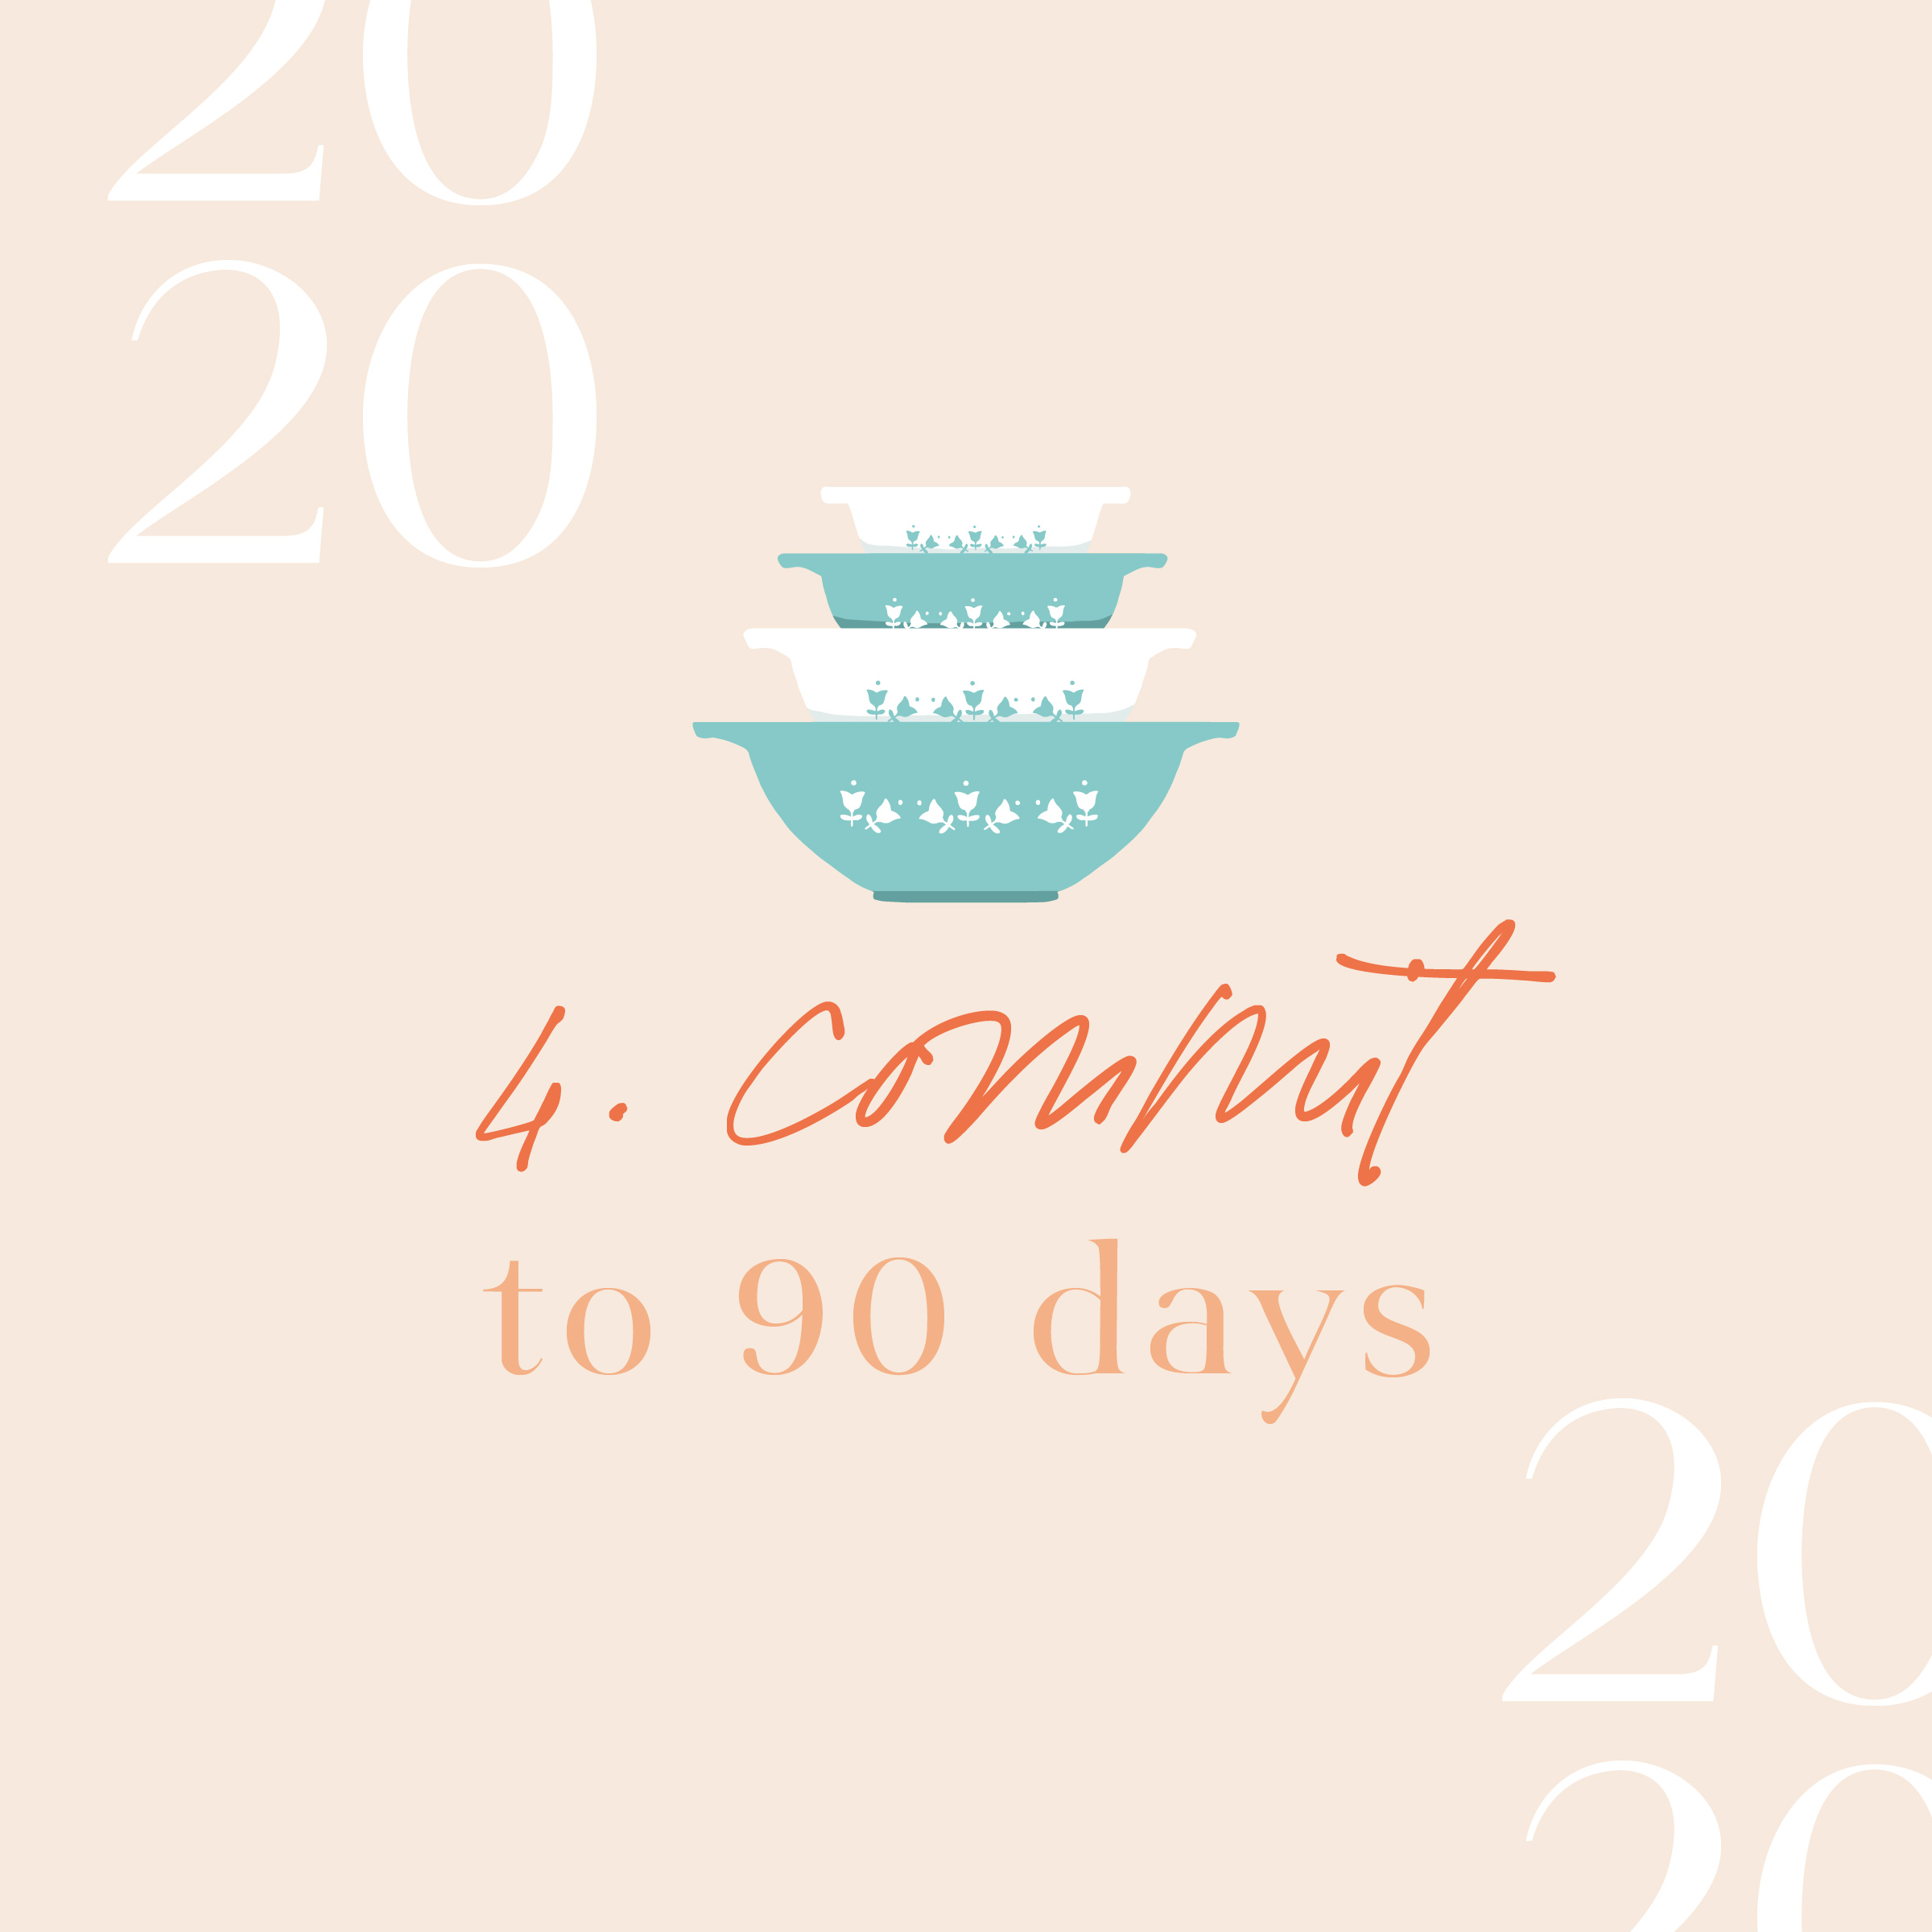 Healthy habits. Commit to 90 days.